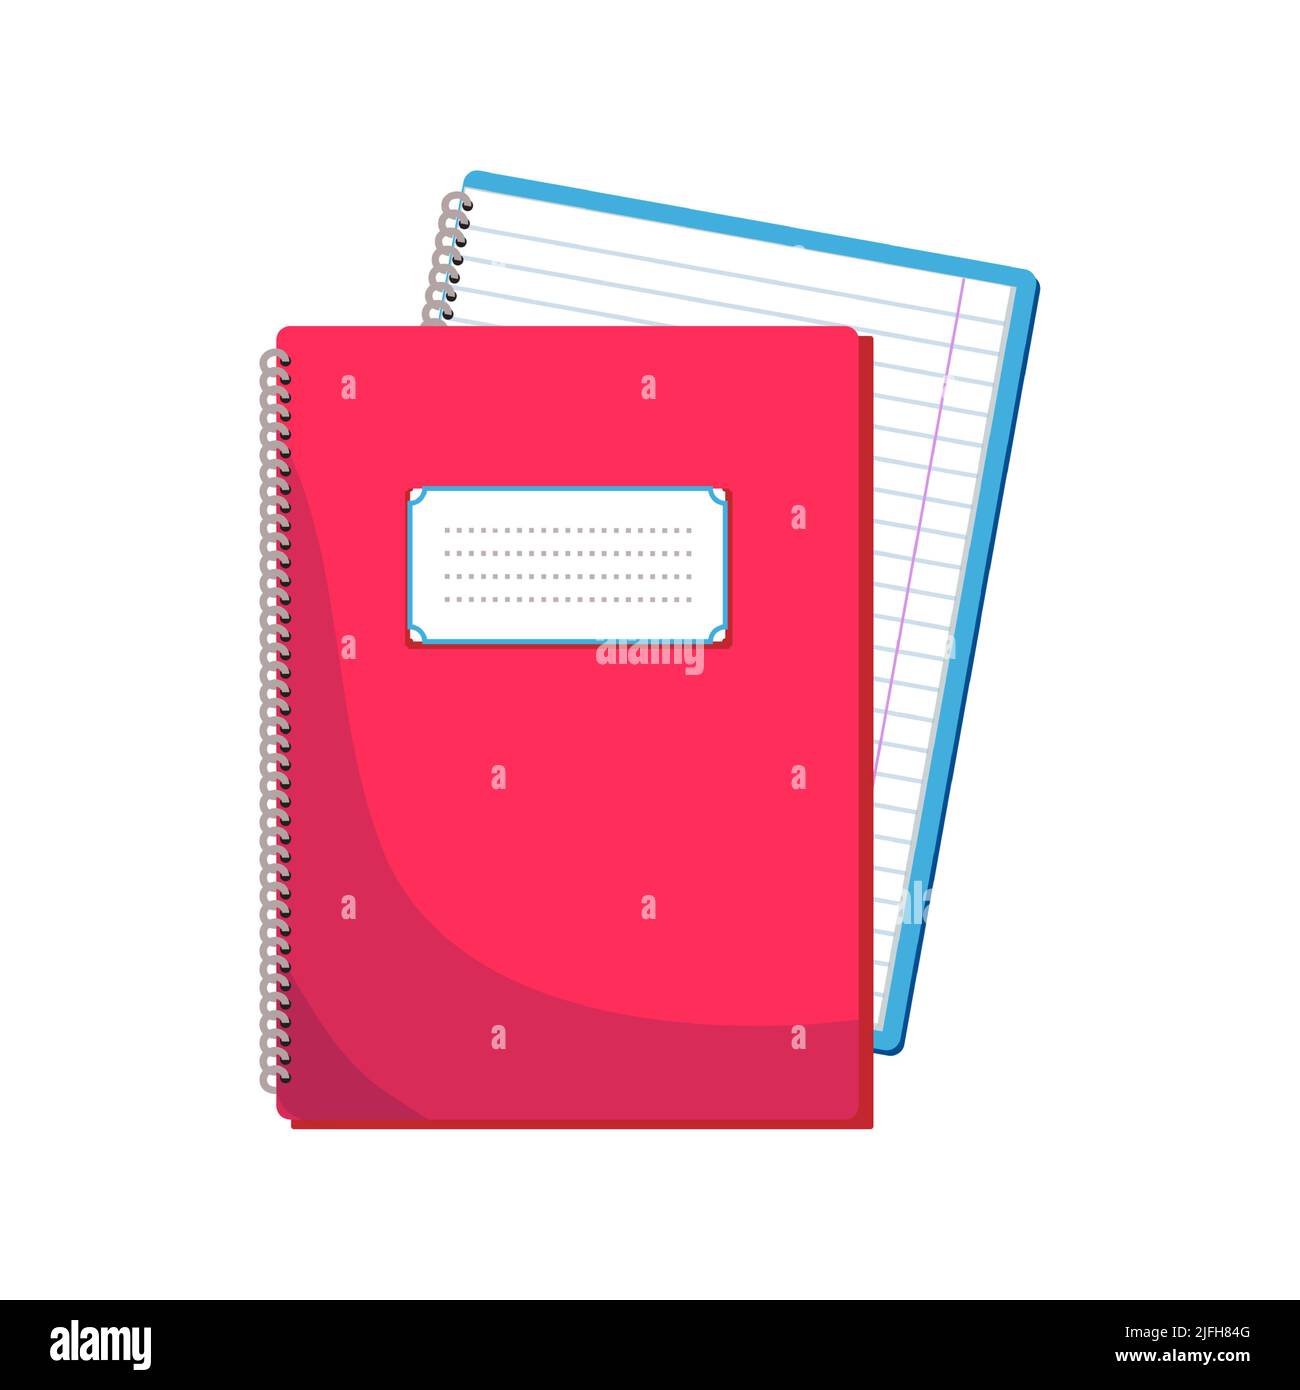 Notebooks vector illustration icon isolated on white background for educational and back to school design. Stock Vector